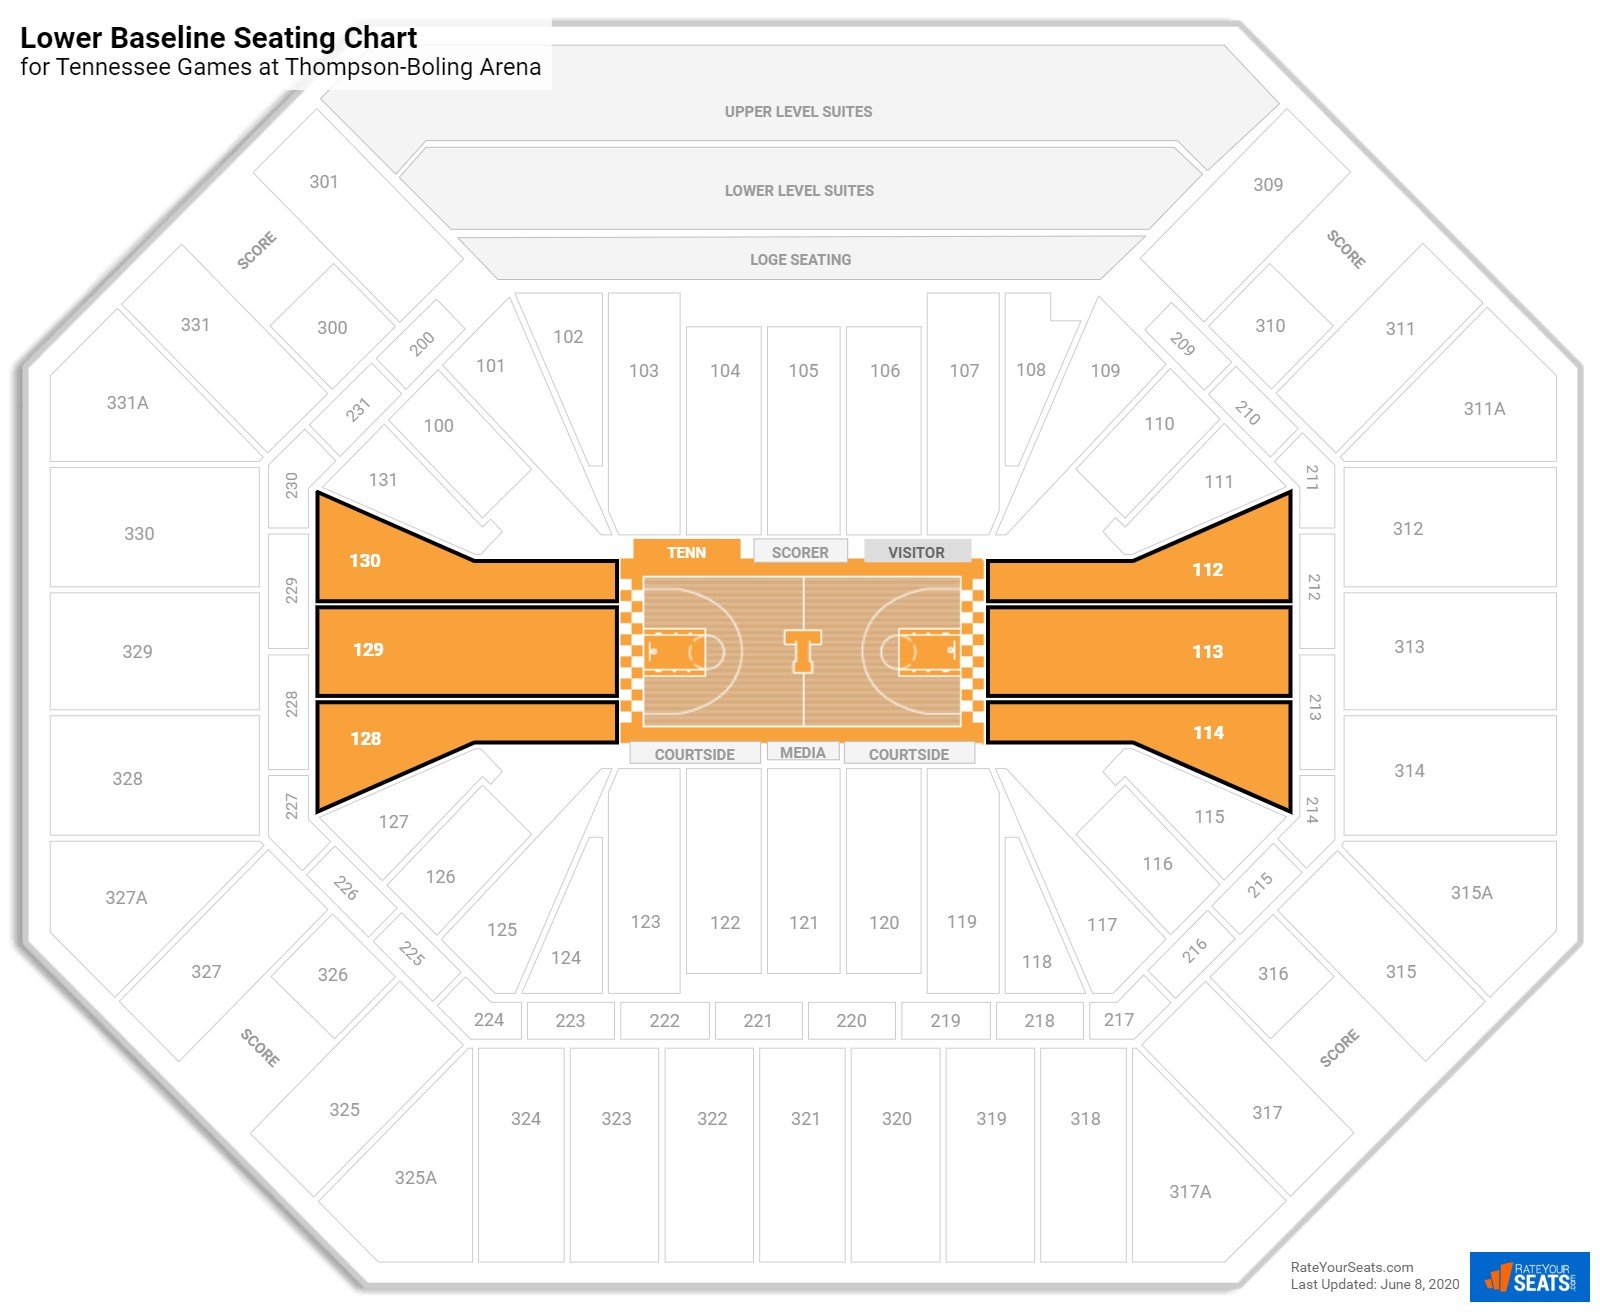 Thompson-Boling Arena (Tennessee) Seating Guide ...